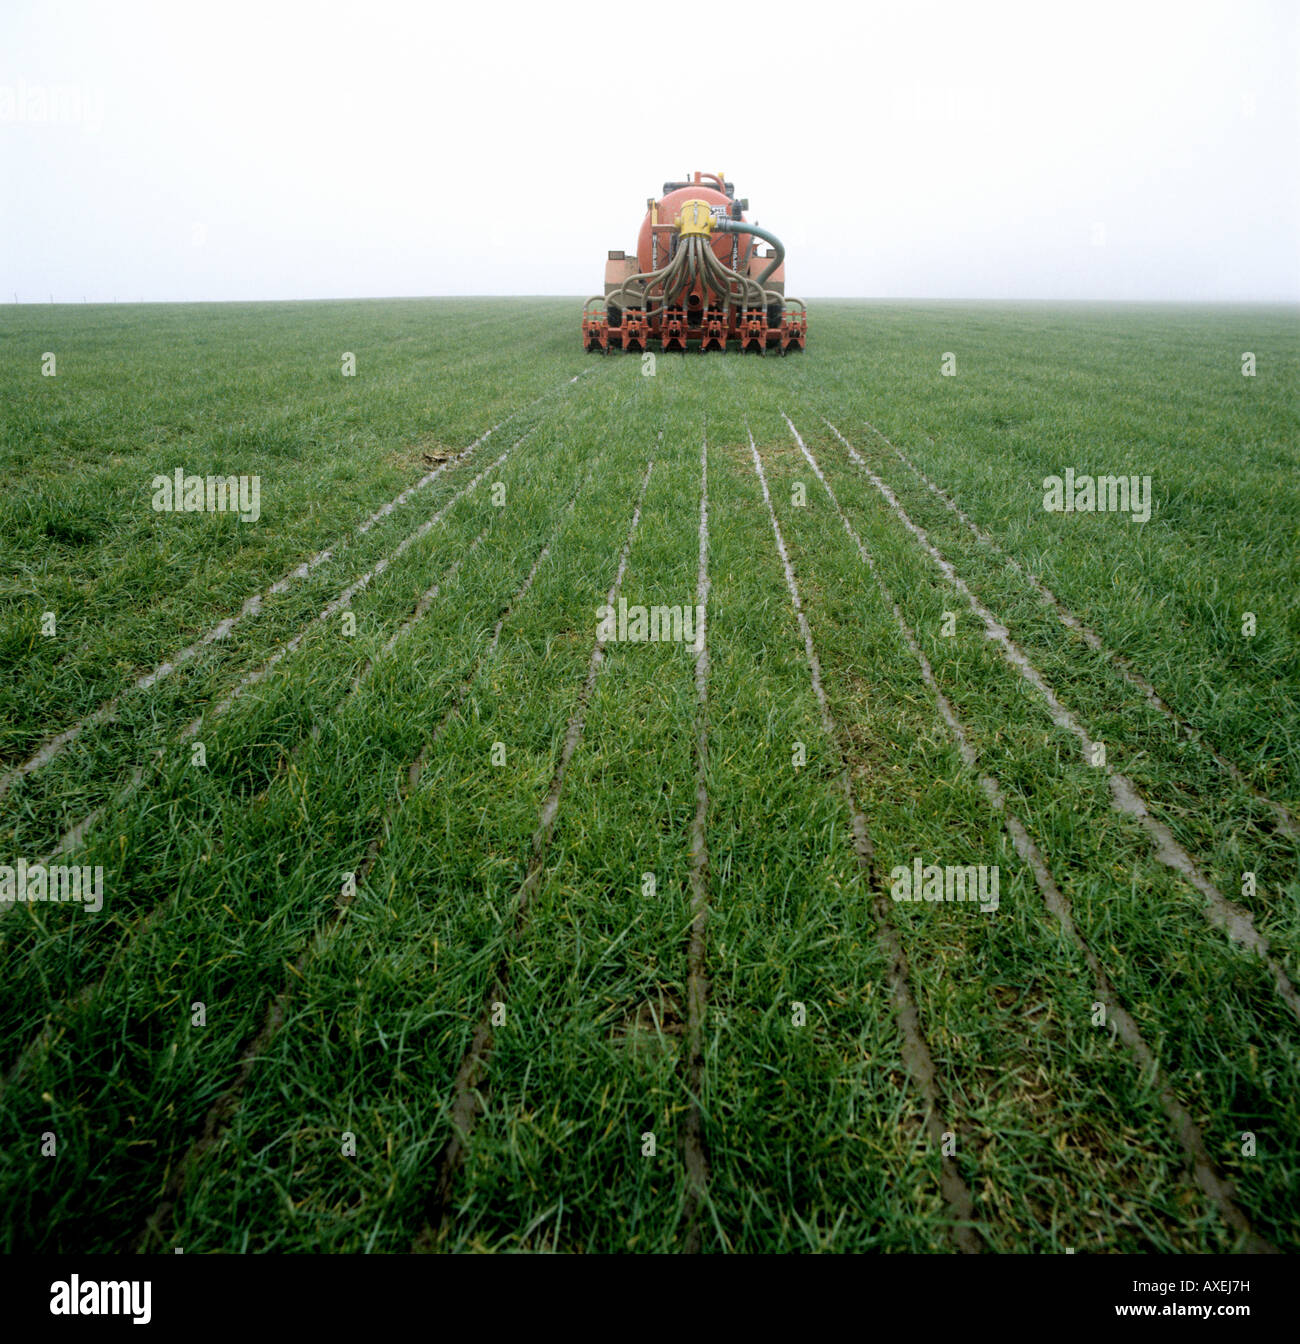 Tractor and Hispec slurry injector injecting slurry into grassland Stock Photo